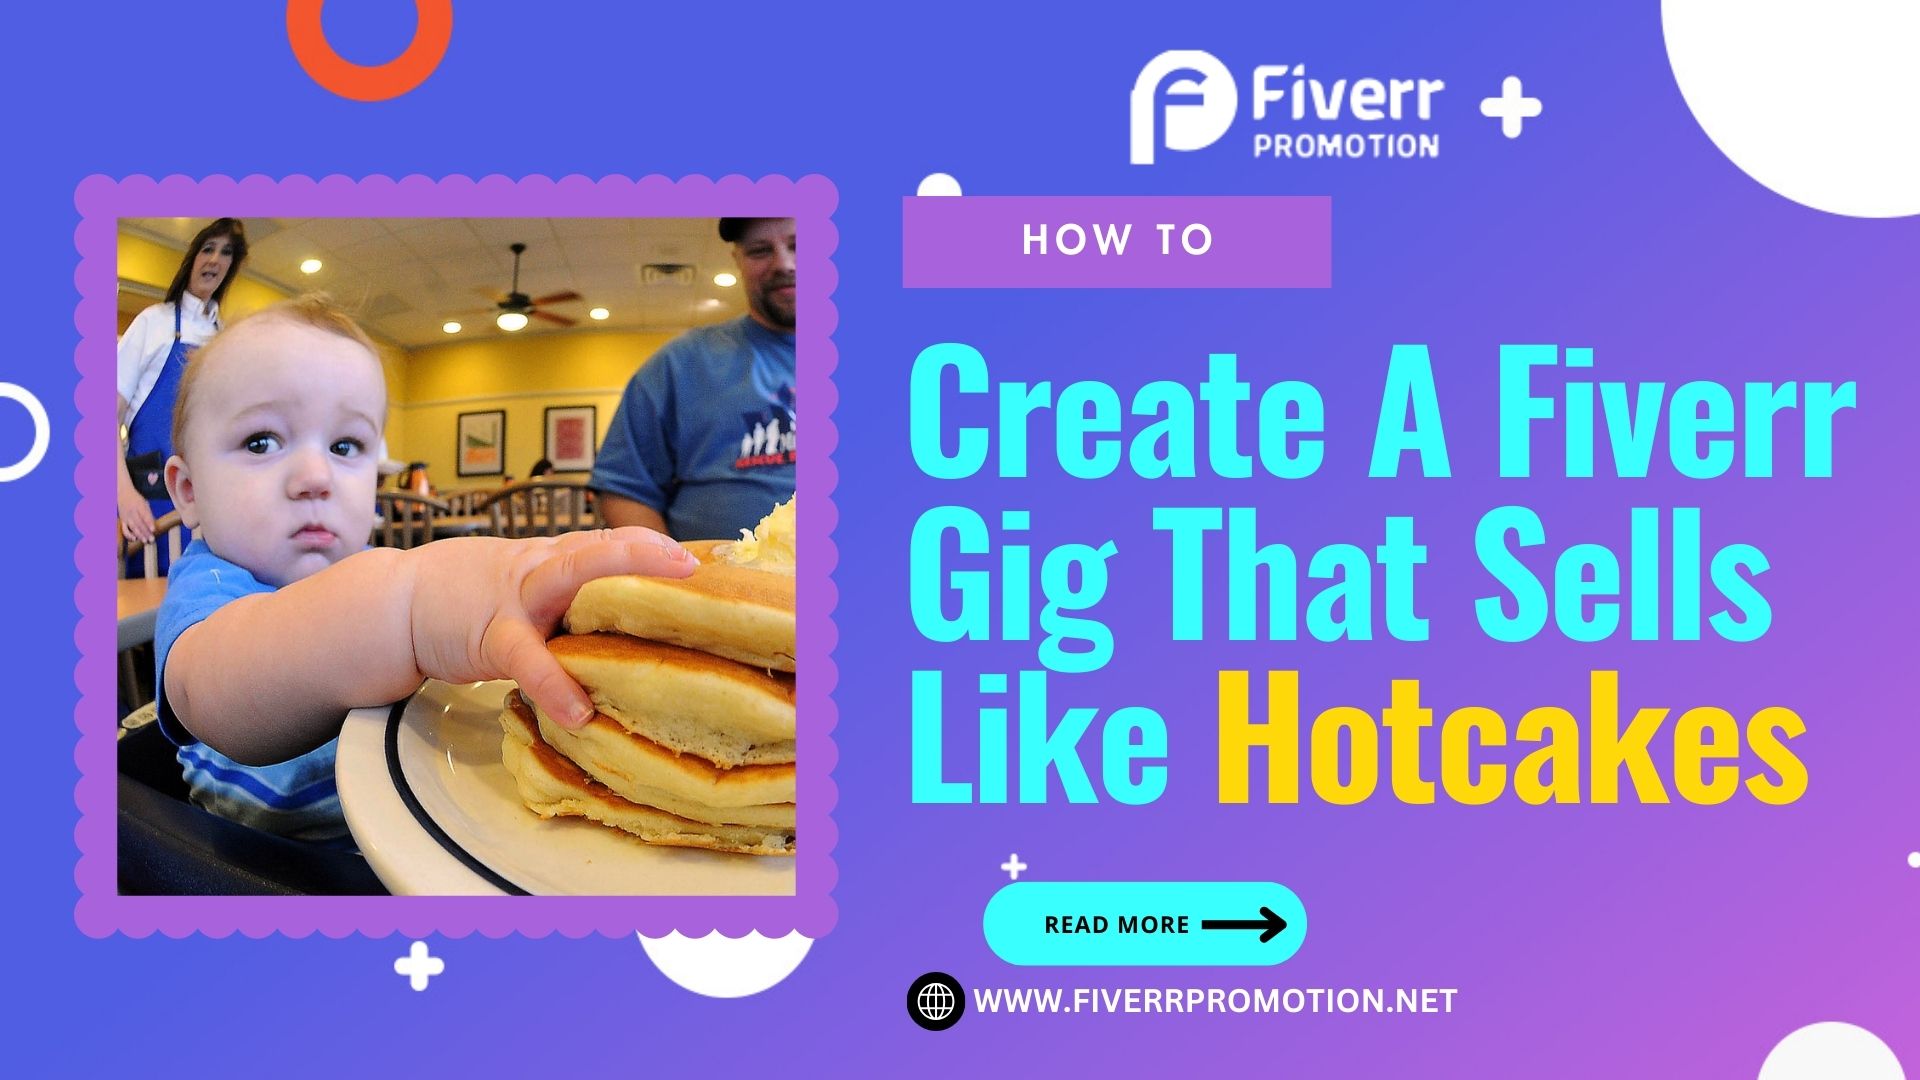 How to create a Fiverr gig that sells like hotcakes